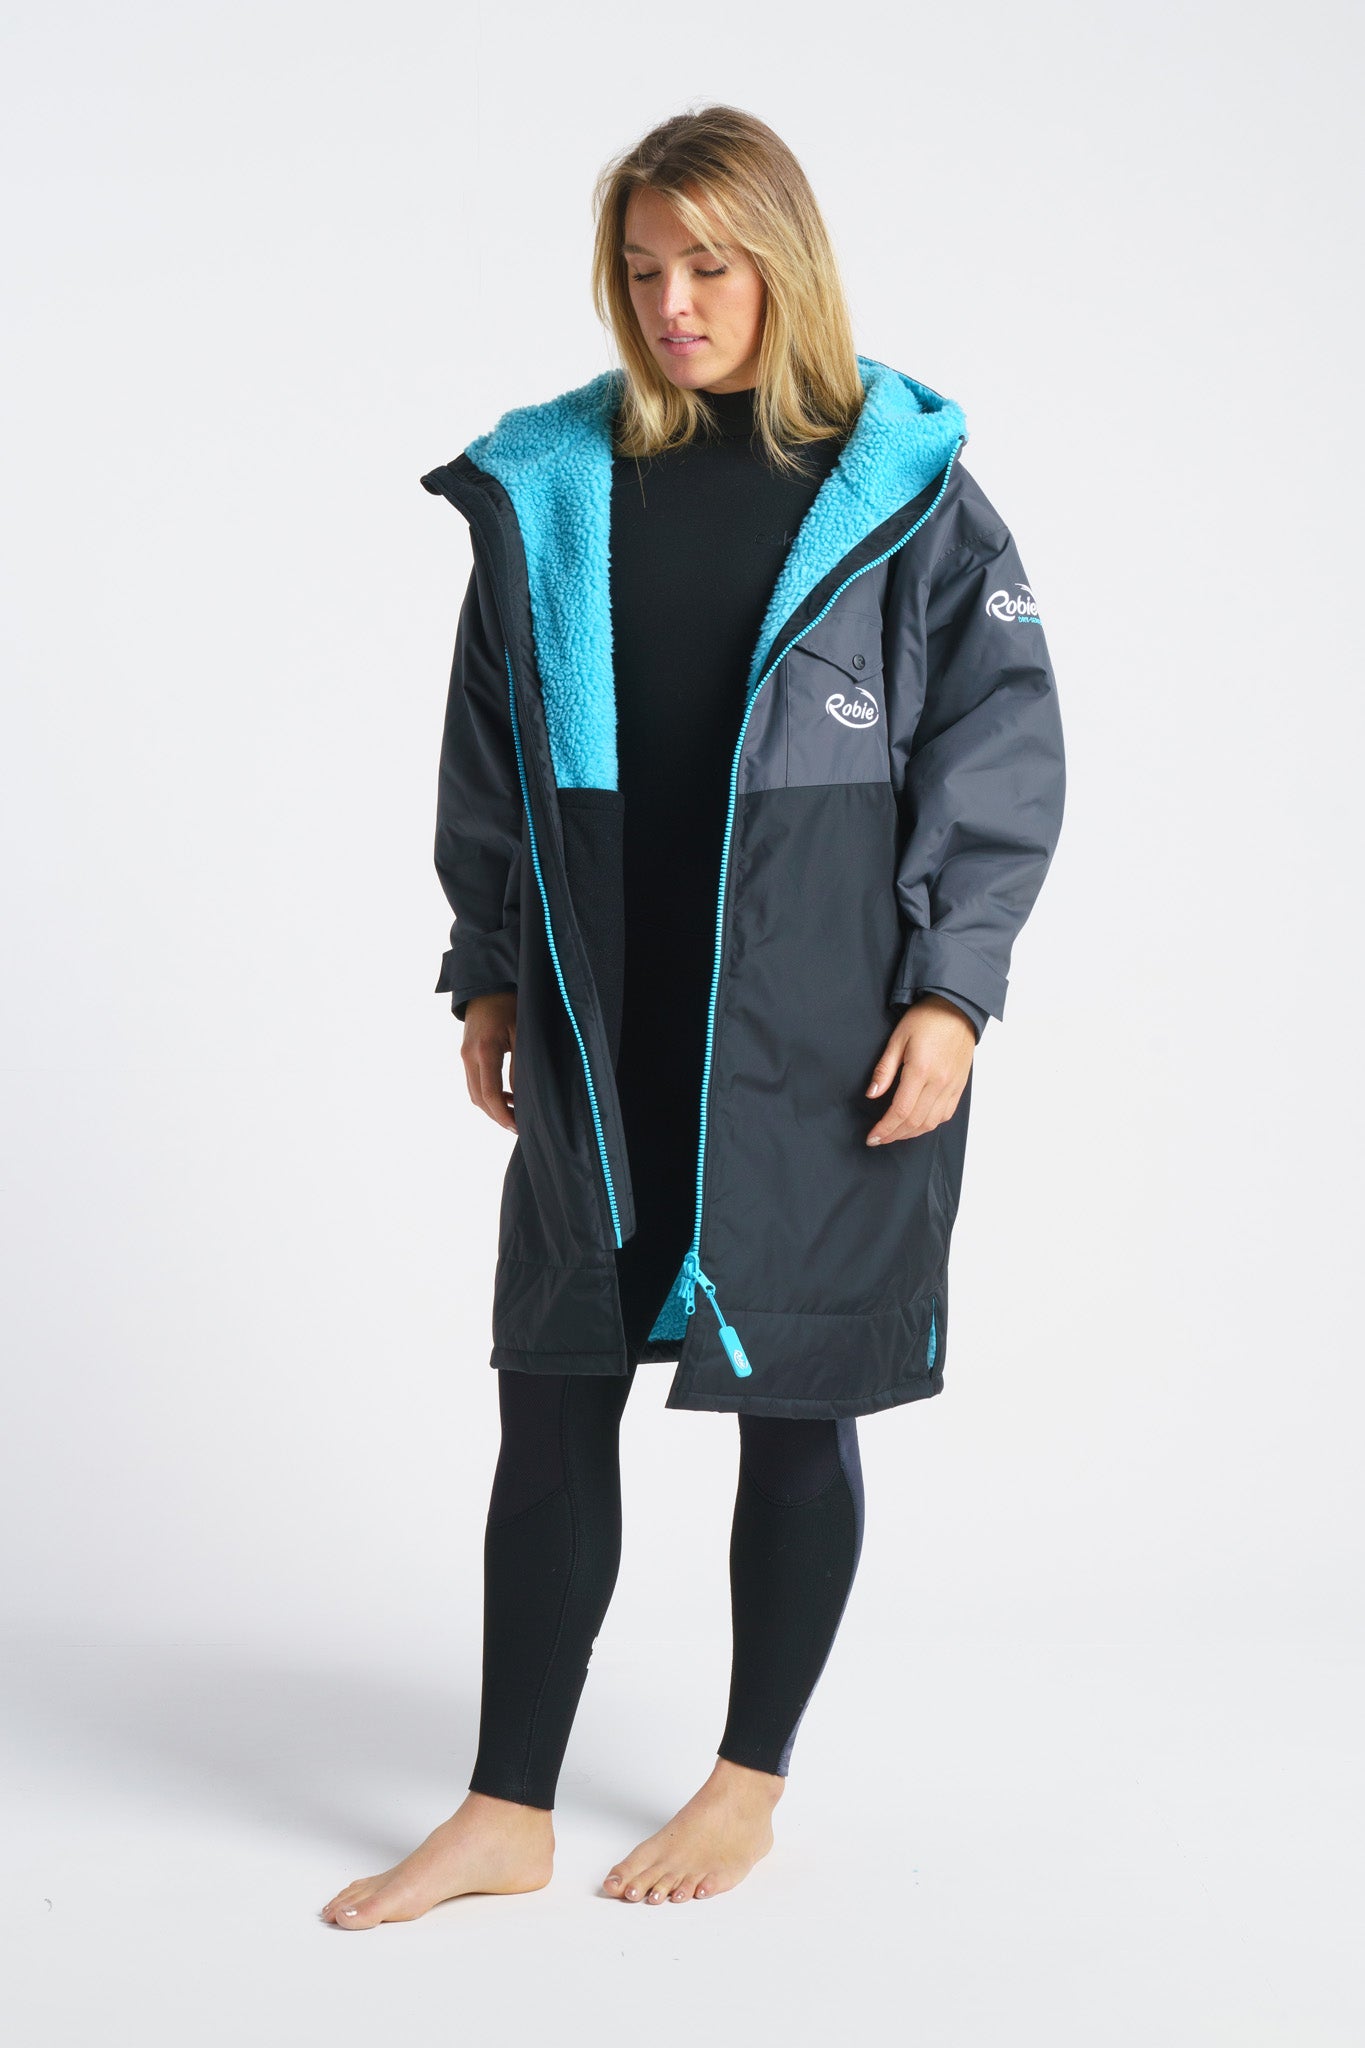 robie-robes-dry-series-changing-robe-waterproof-preorder-product-blacksheepsurfco-galway-ireland-charcoal-blue-atoll-small-4